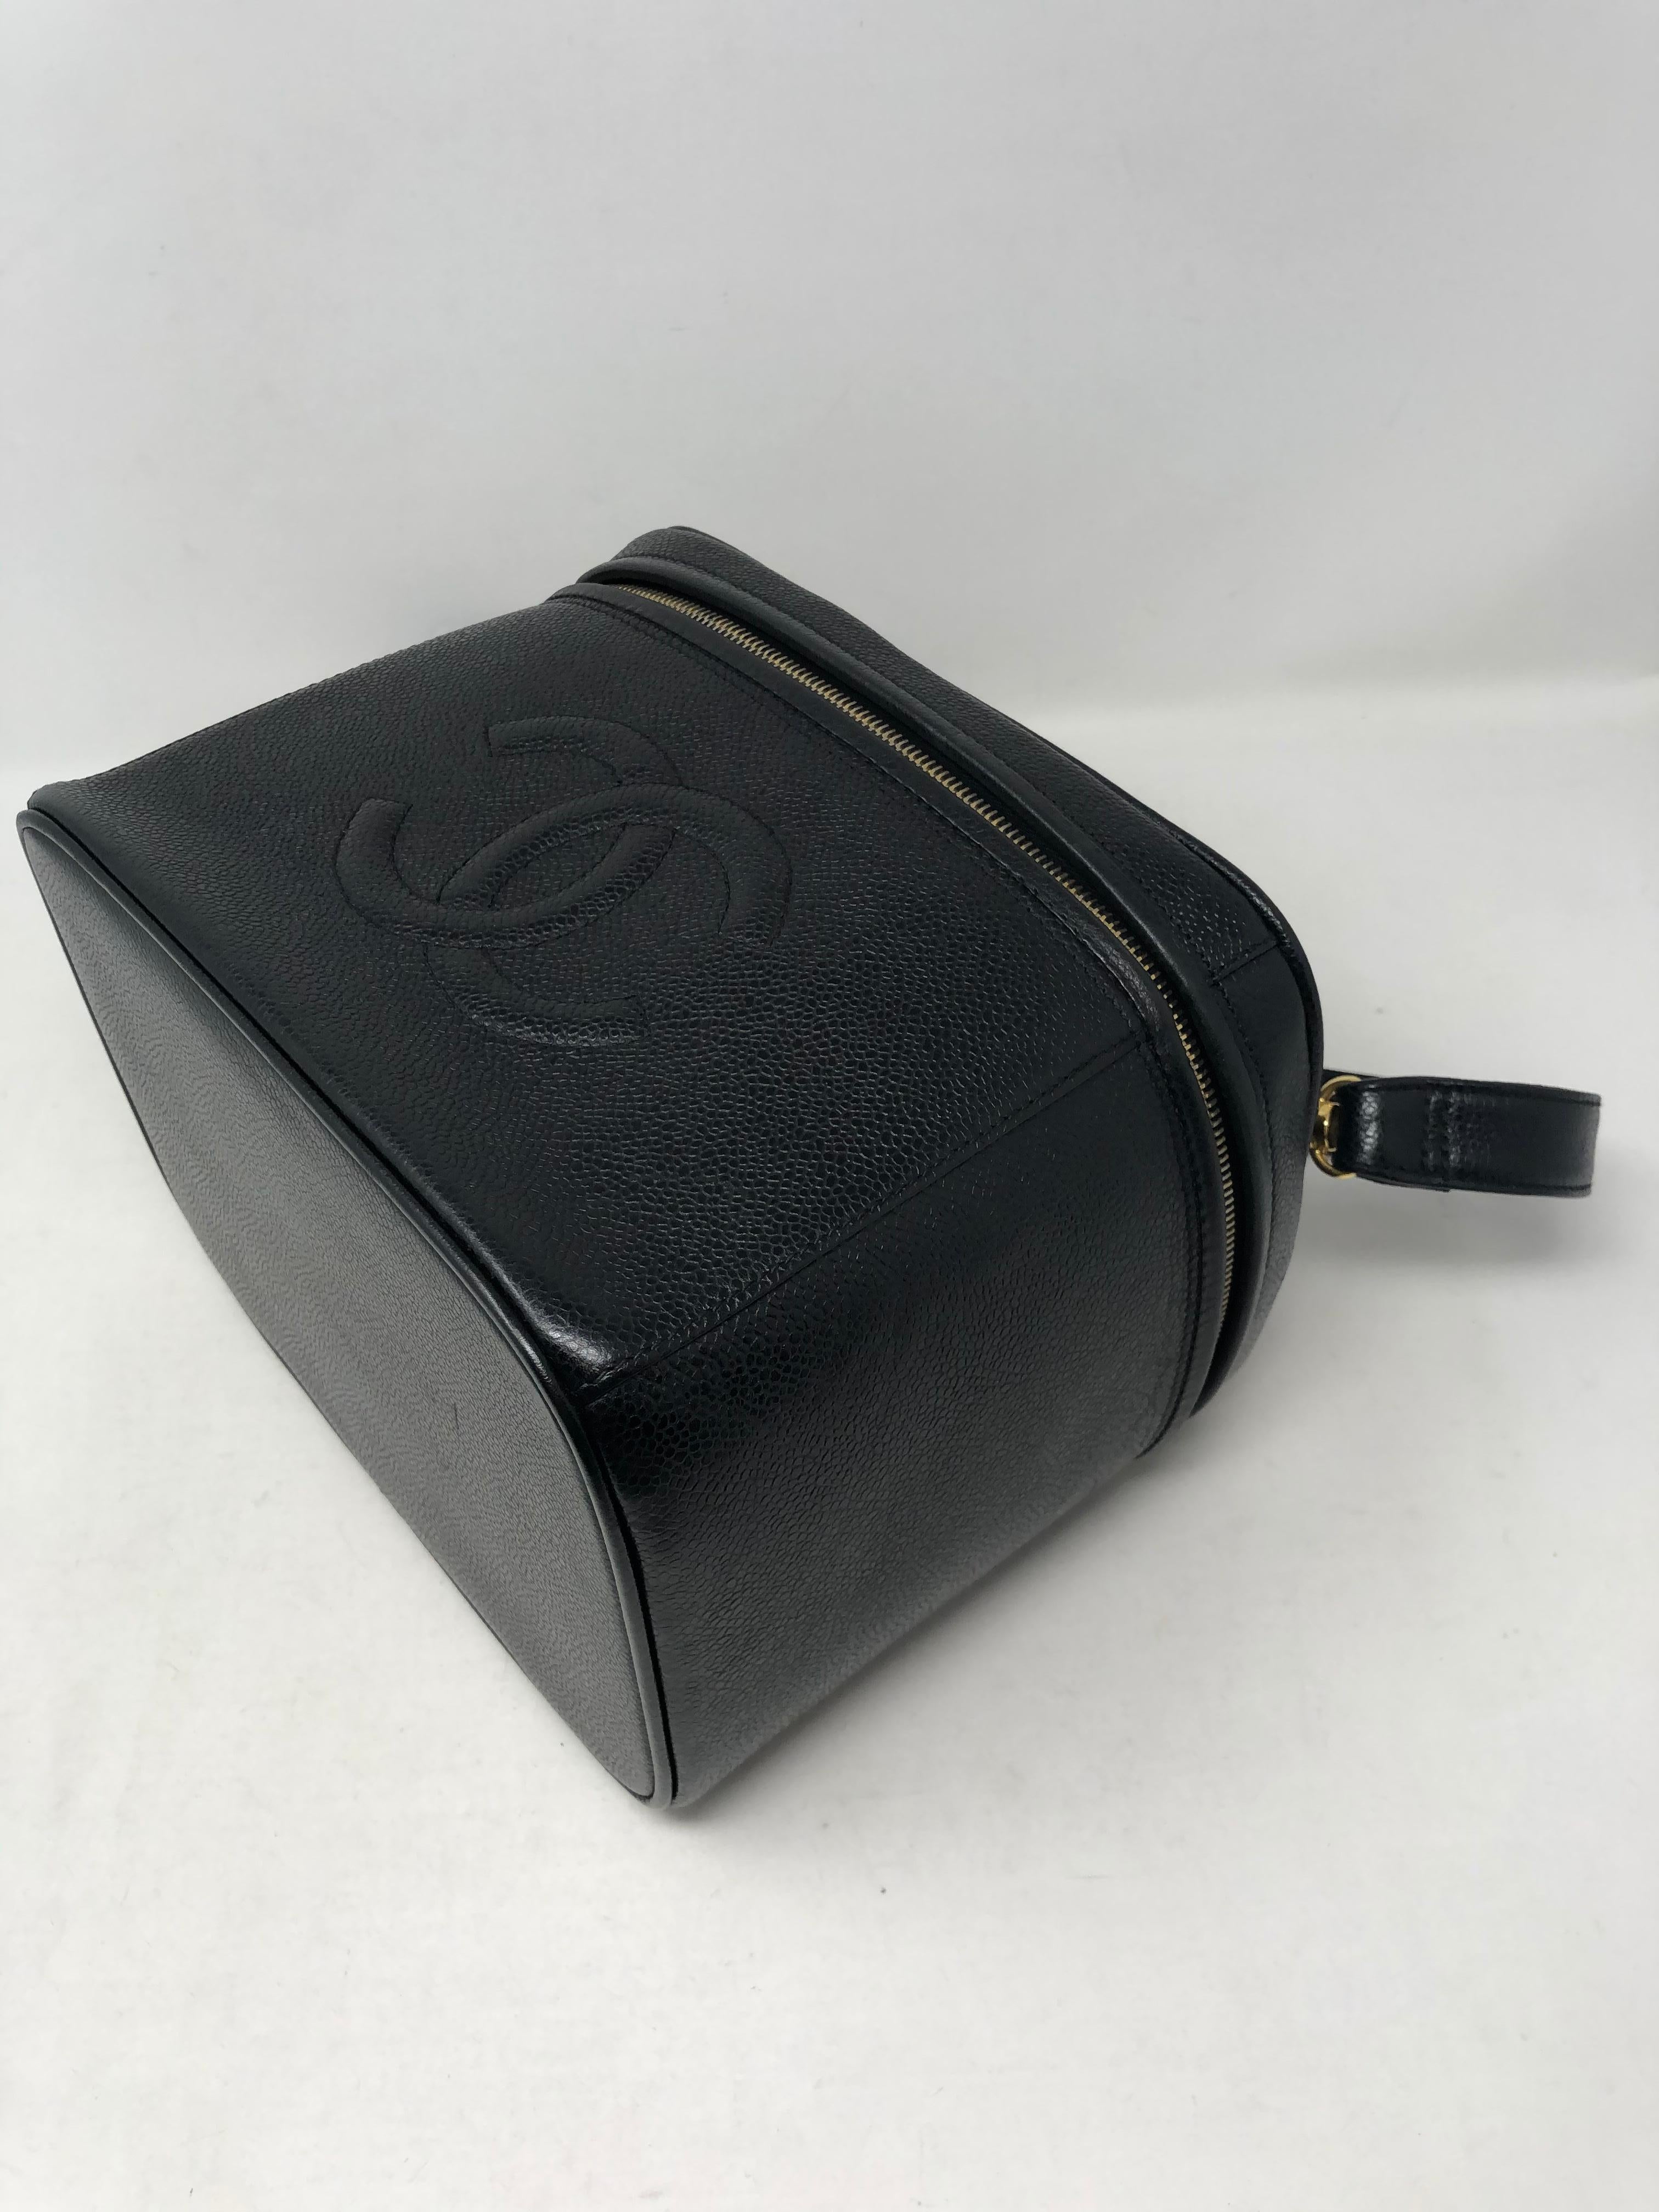 Chanel Vanity Case With Strap  7